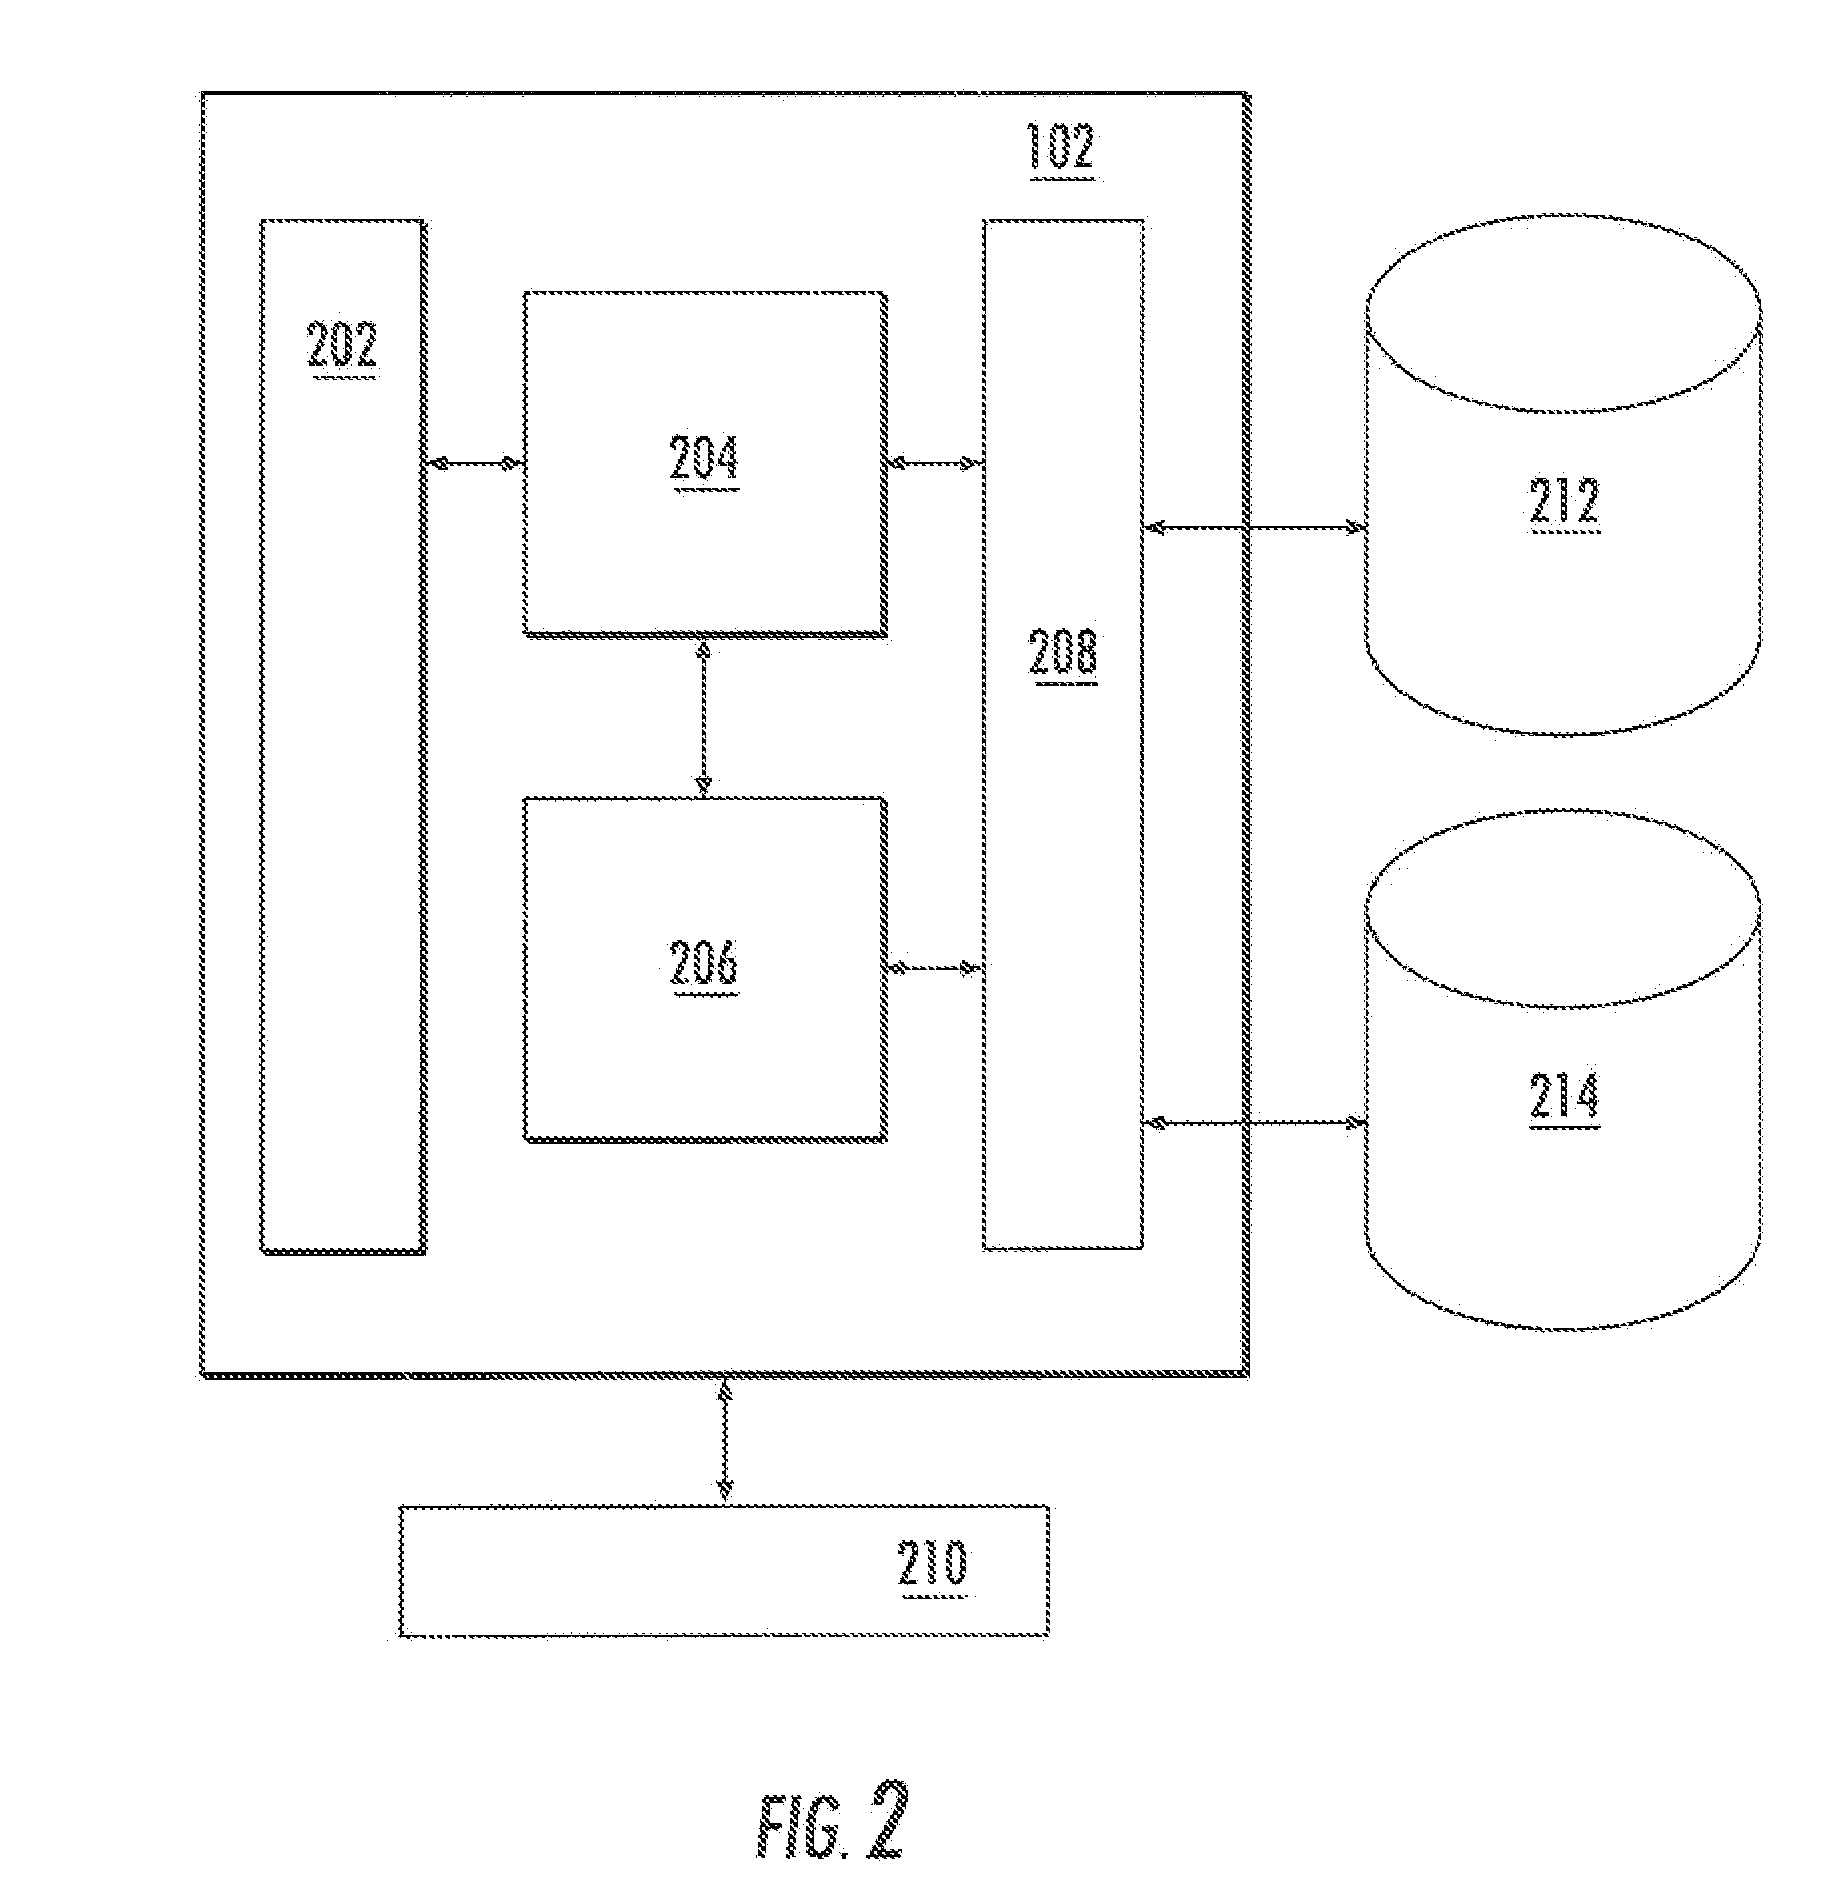 Method and system for automatically generating reminders in response to detecting key terms within a communication